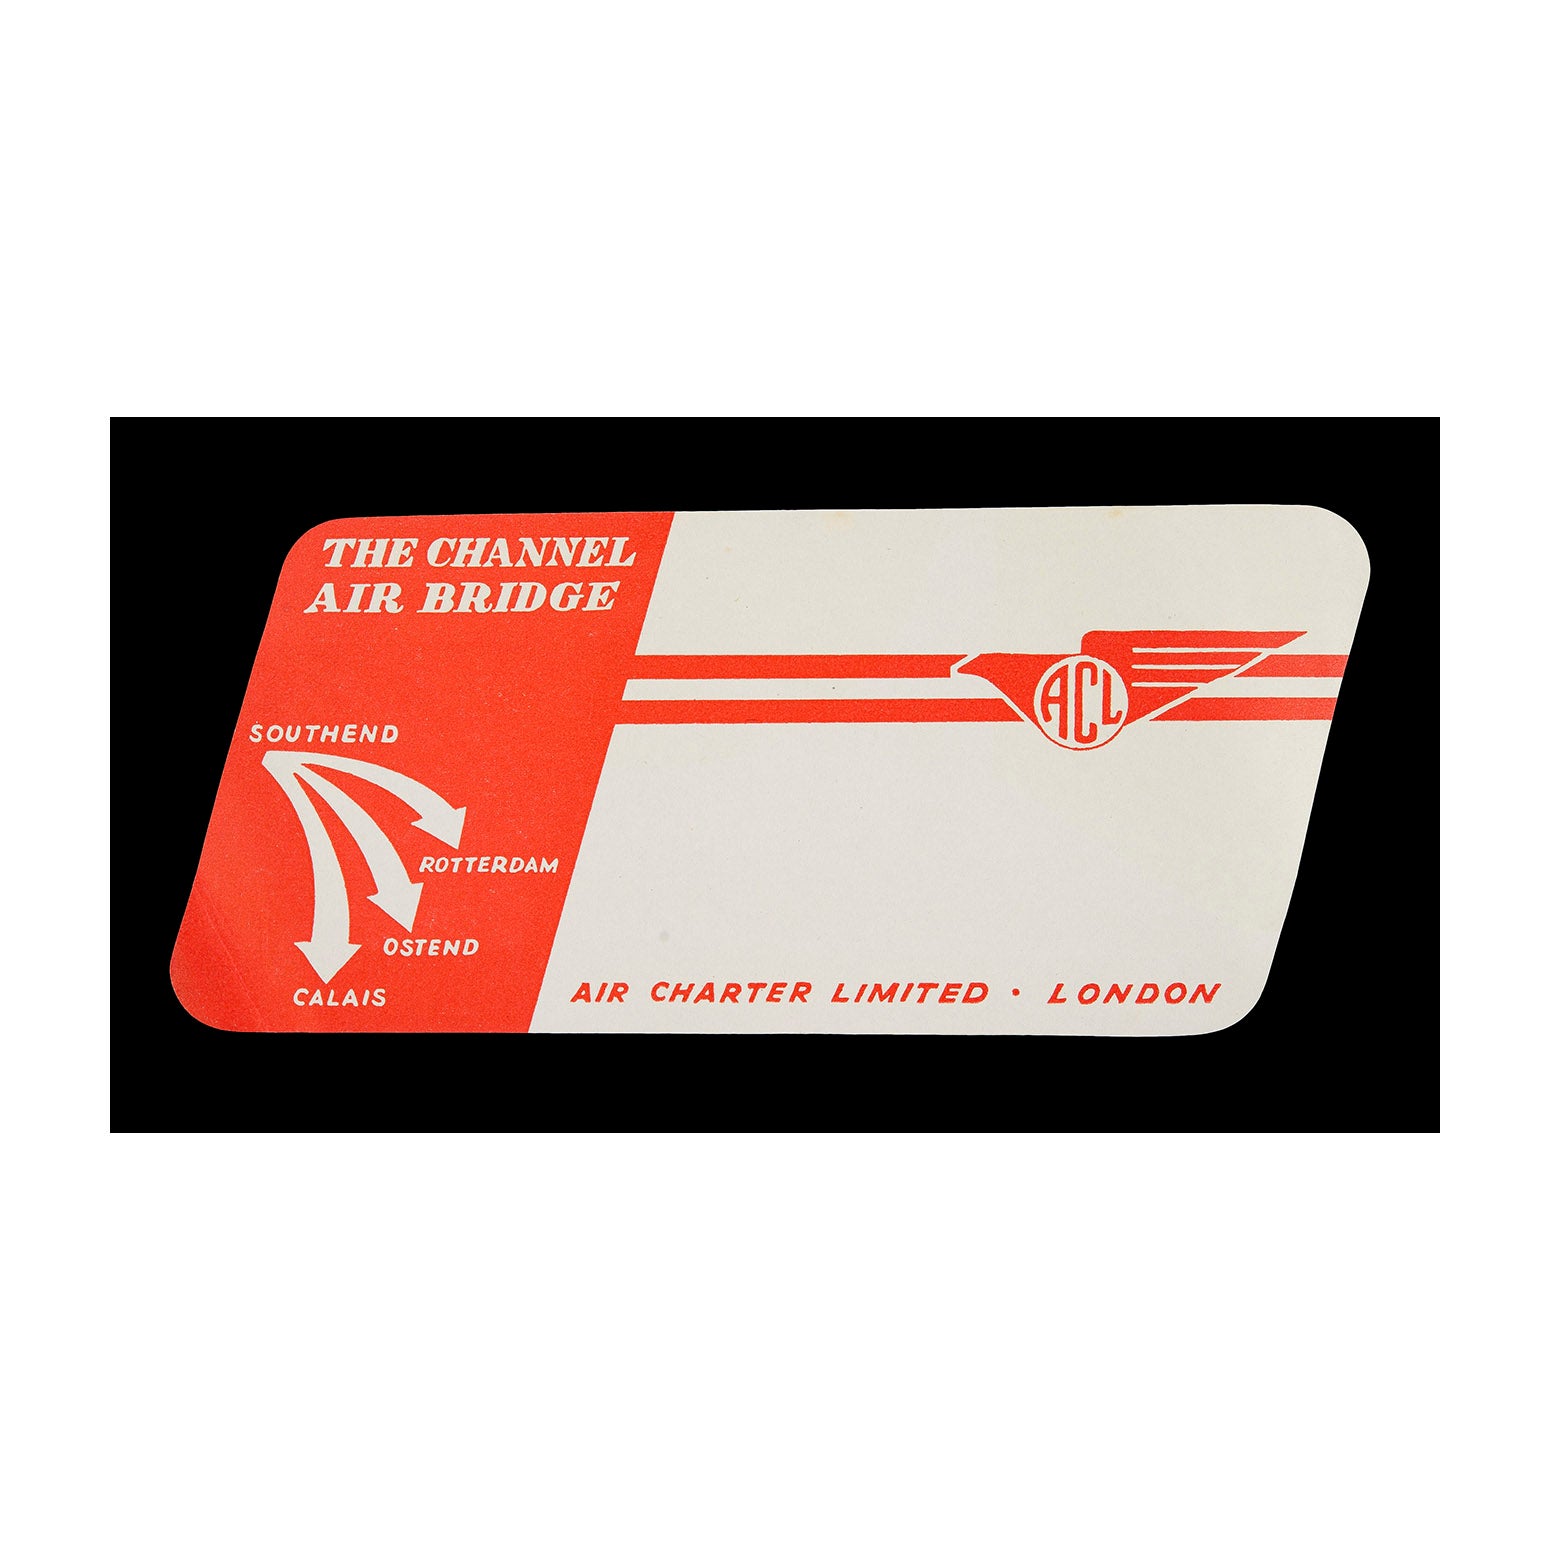 Air Charter Limited. The Channel Air Bridge (Luggage Label)